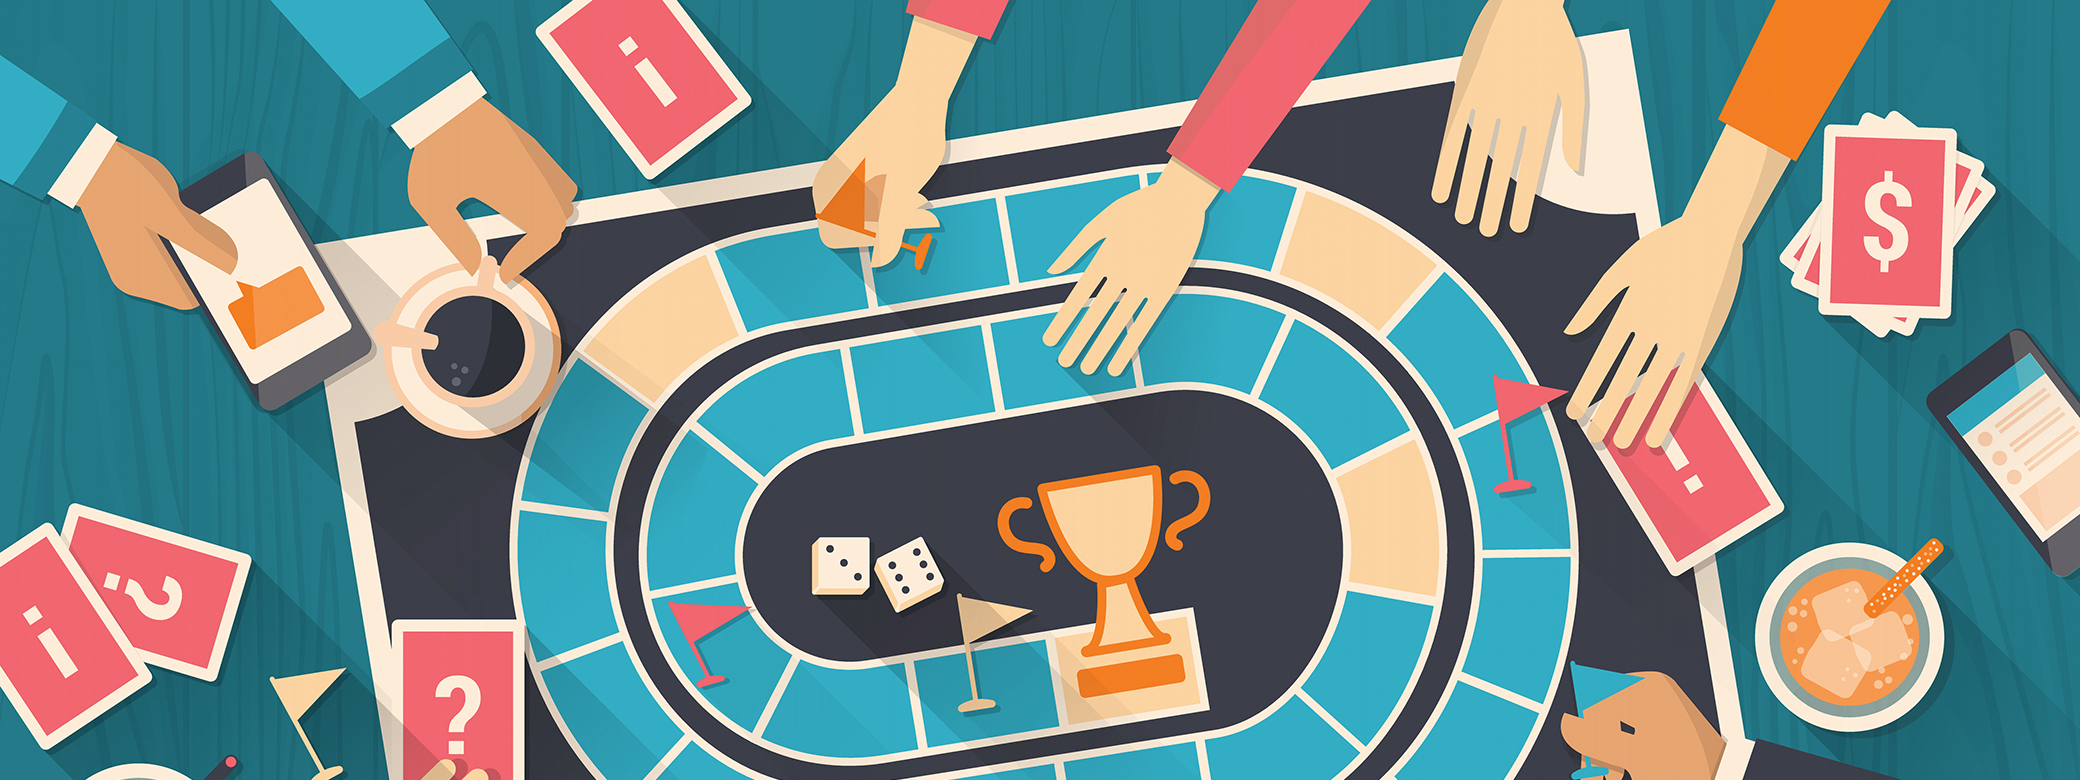 Illustration of hands reaching out to grab cards on a game board